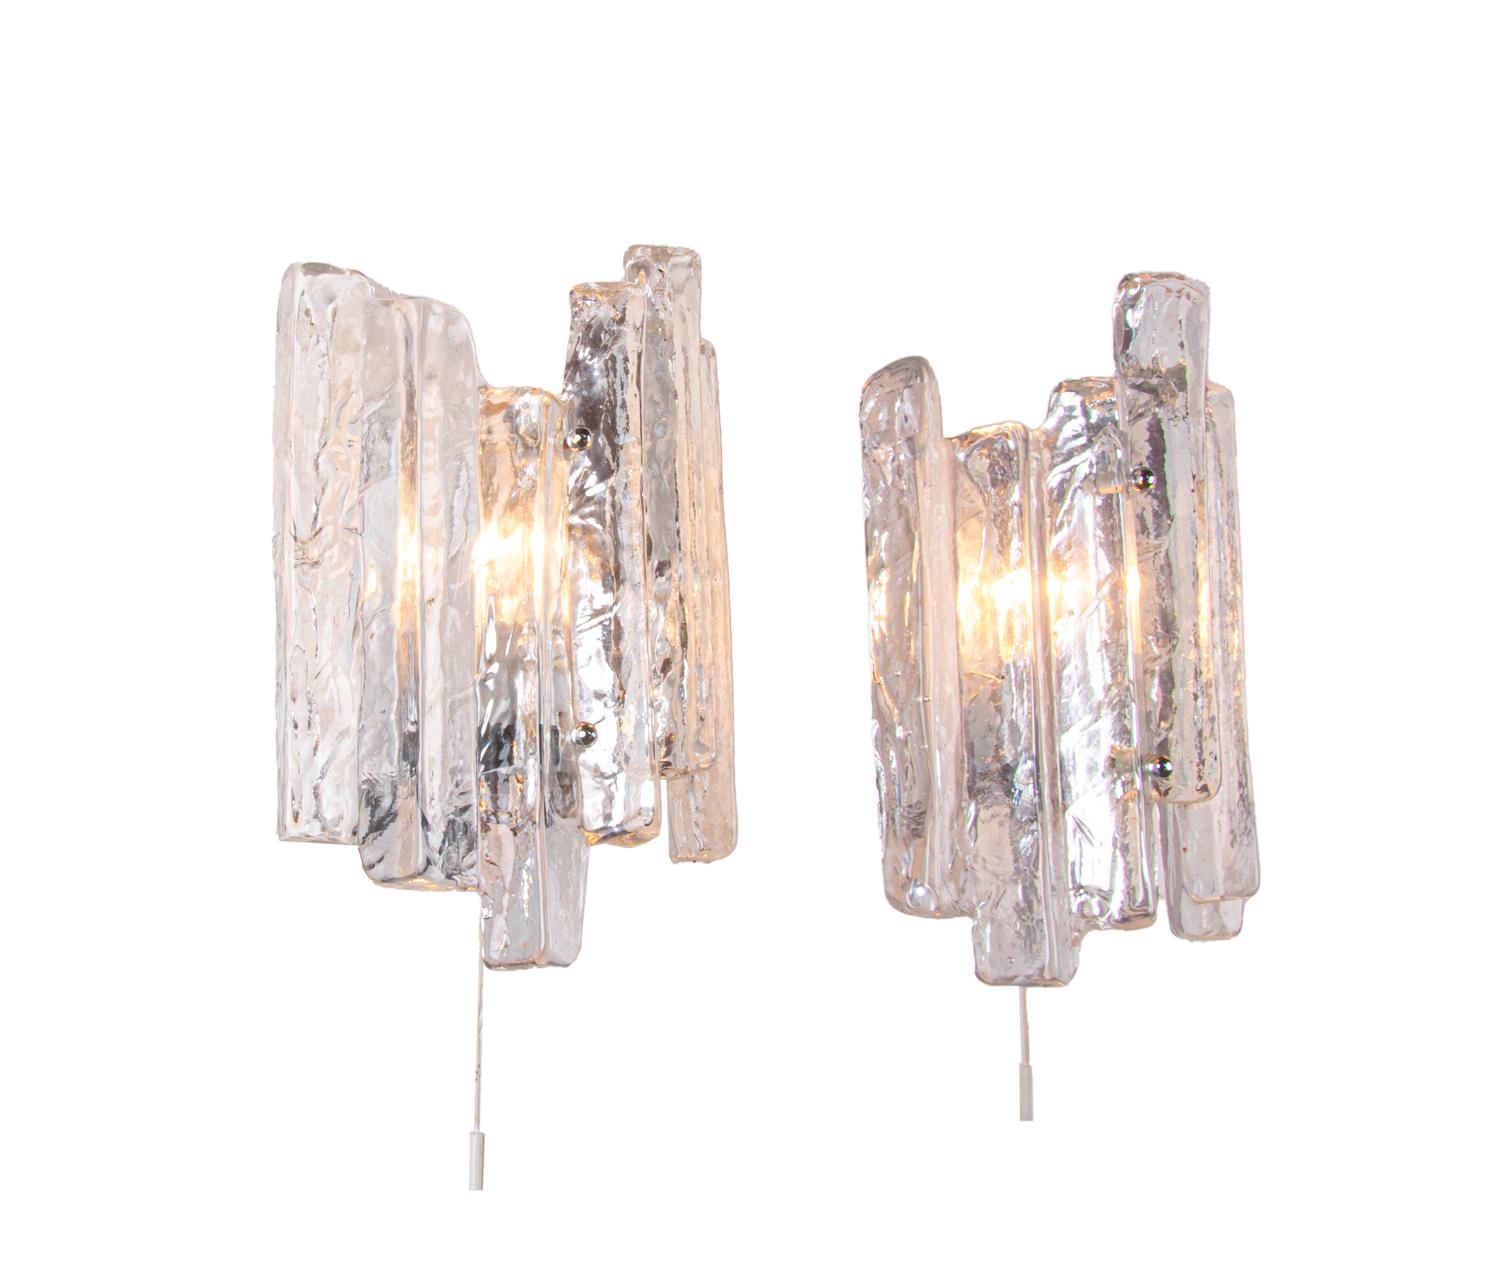 Elegant set of two hand blown Murano glass wall sconces on a nickel frame. Hanging glass resembles ice floes. Gem from the time. With this light you make a clear statement in your interior design. A real eye-catcher even unlit. Manufactured by J.T.